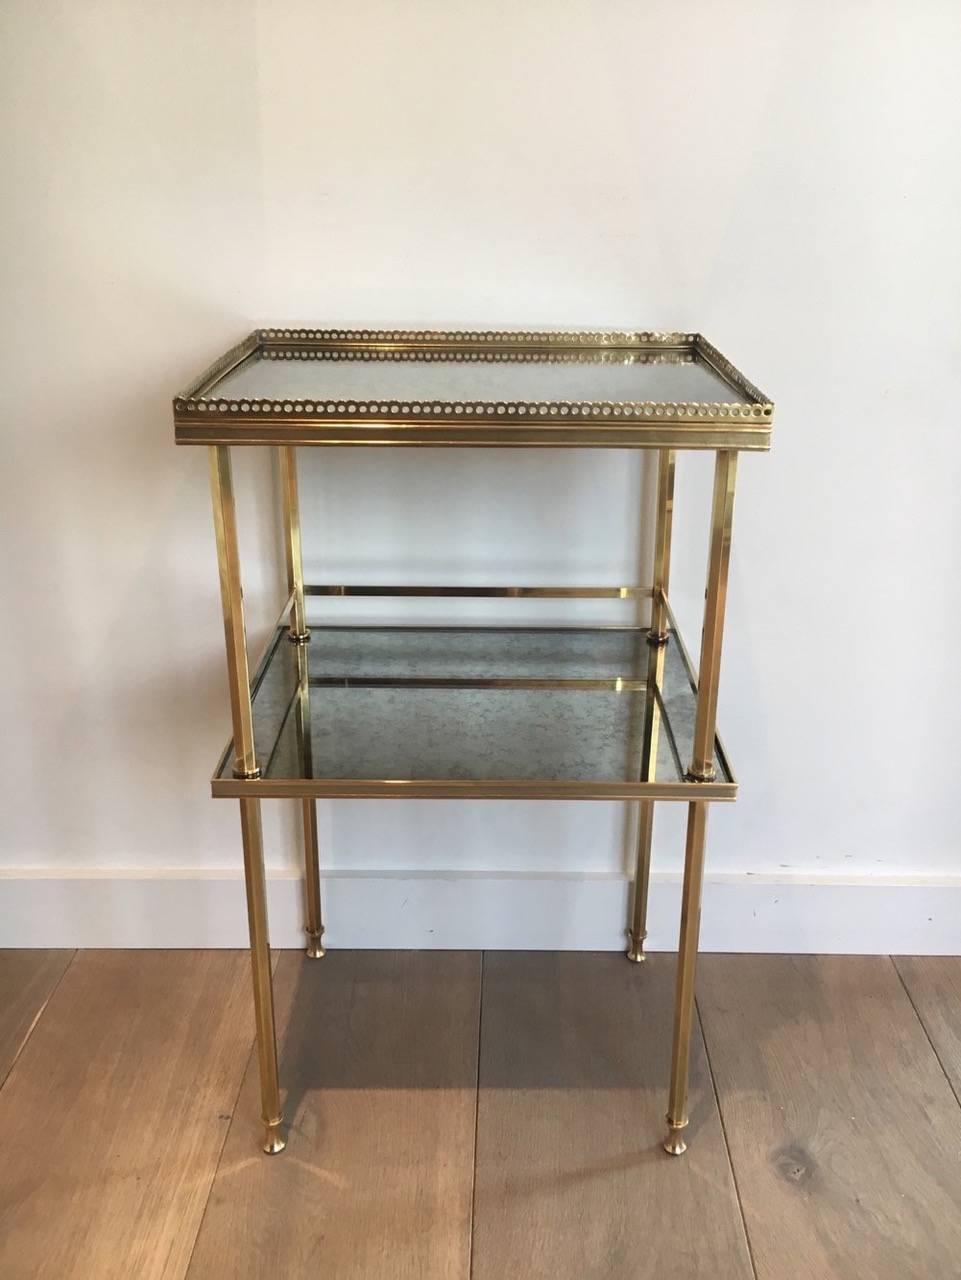 Pair of 1940s French brass side tables with eglomised mirror top attributed to Maison Jansen.